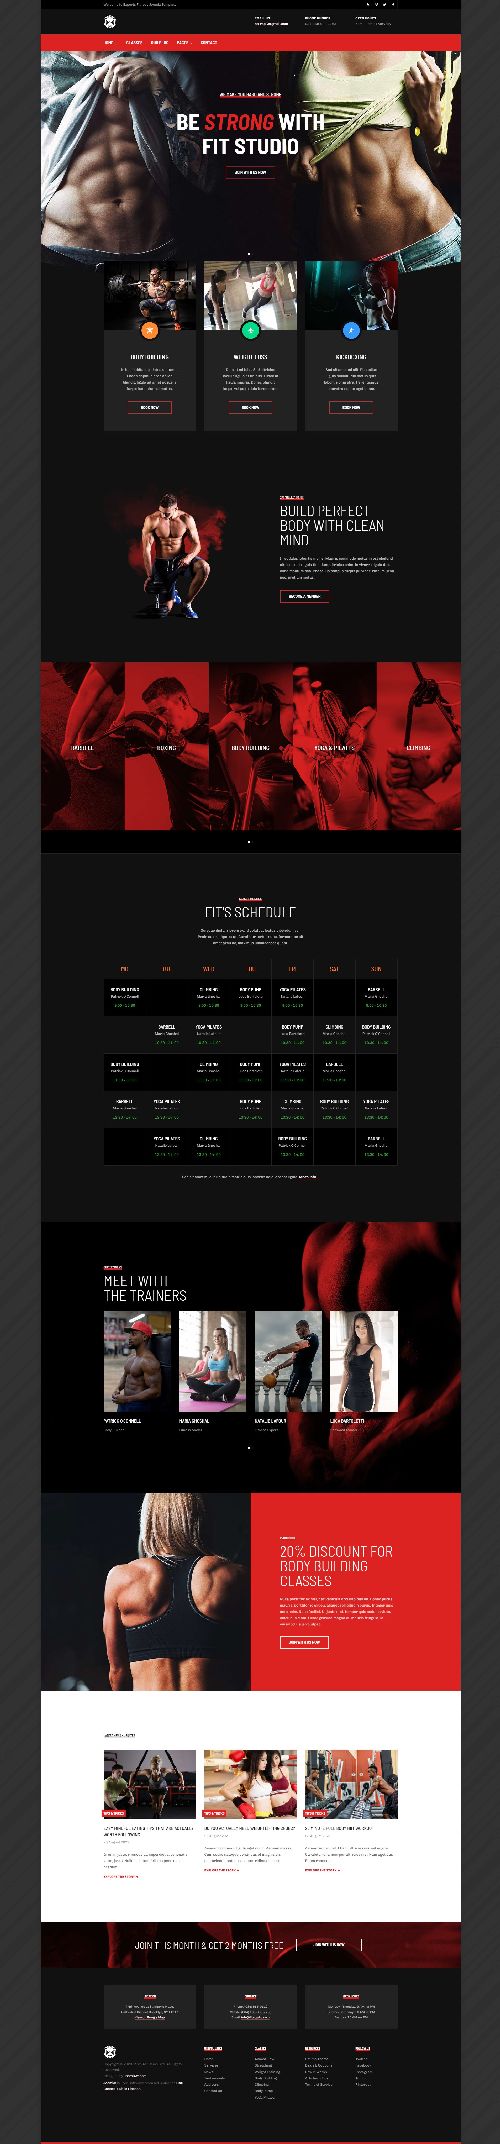 JA Fit - Creative Joomla 4 Template for Gym and Fitness